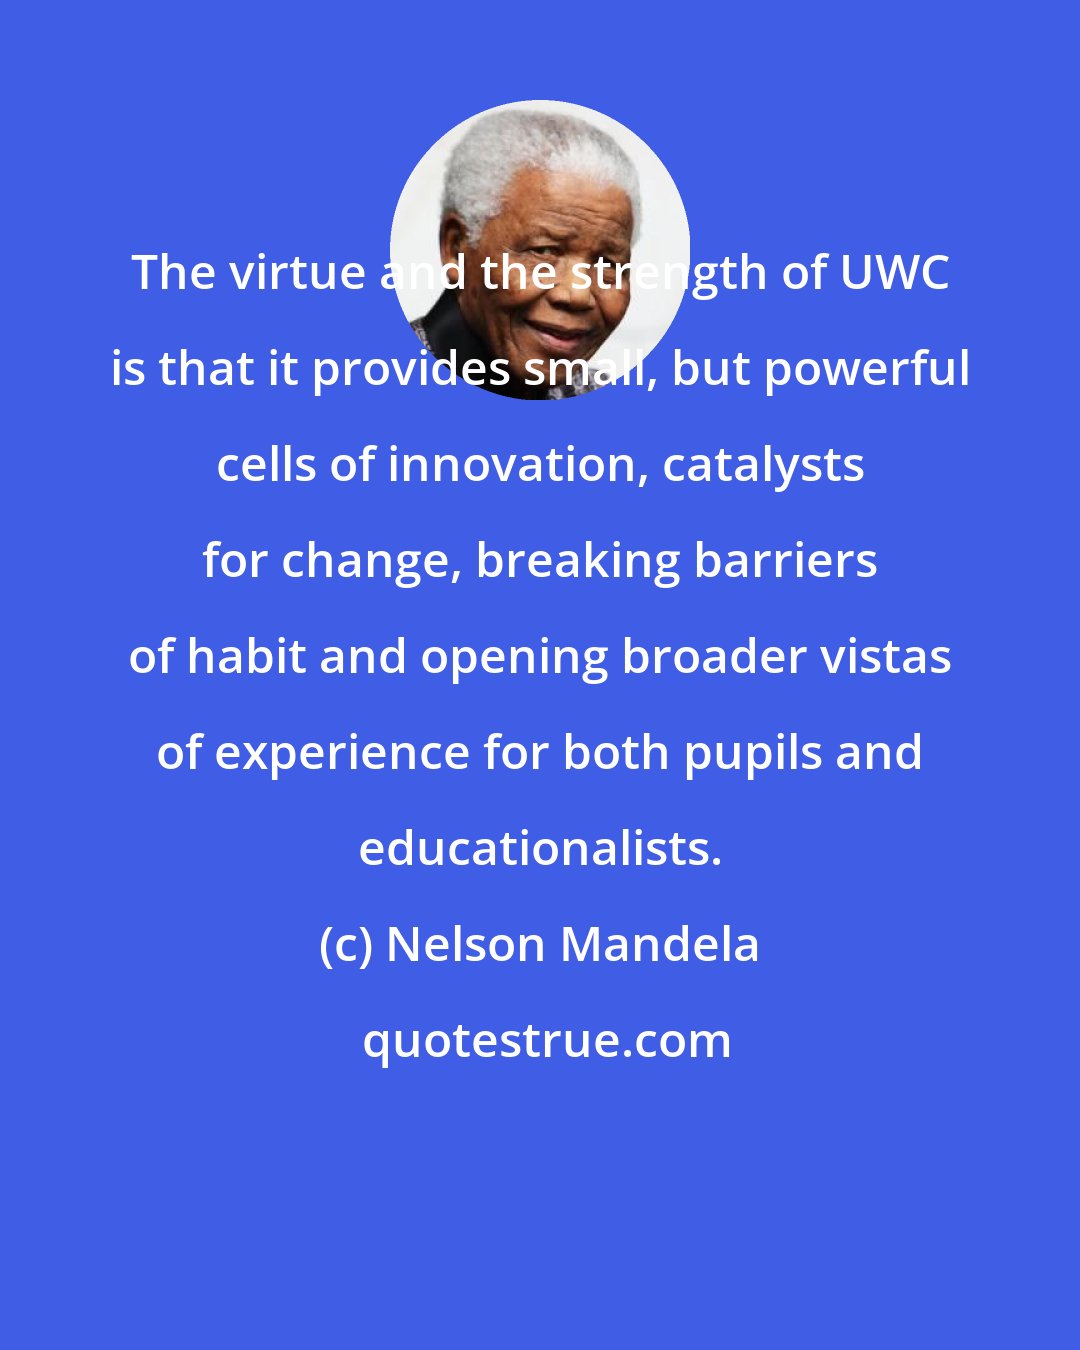 Nelson Mandela: The virtue and the strength of UWC is that it provides small, but powerful cells of innovation, catalysts for change, breaking barriers of habit and opening broader vistas of experience for both pupils and educationalists.